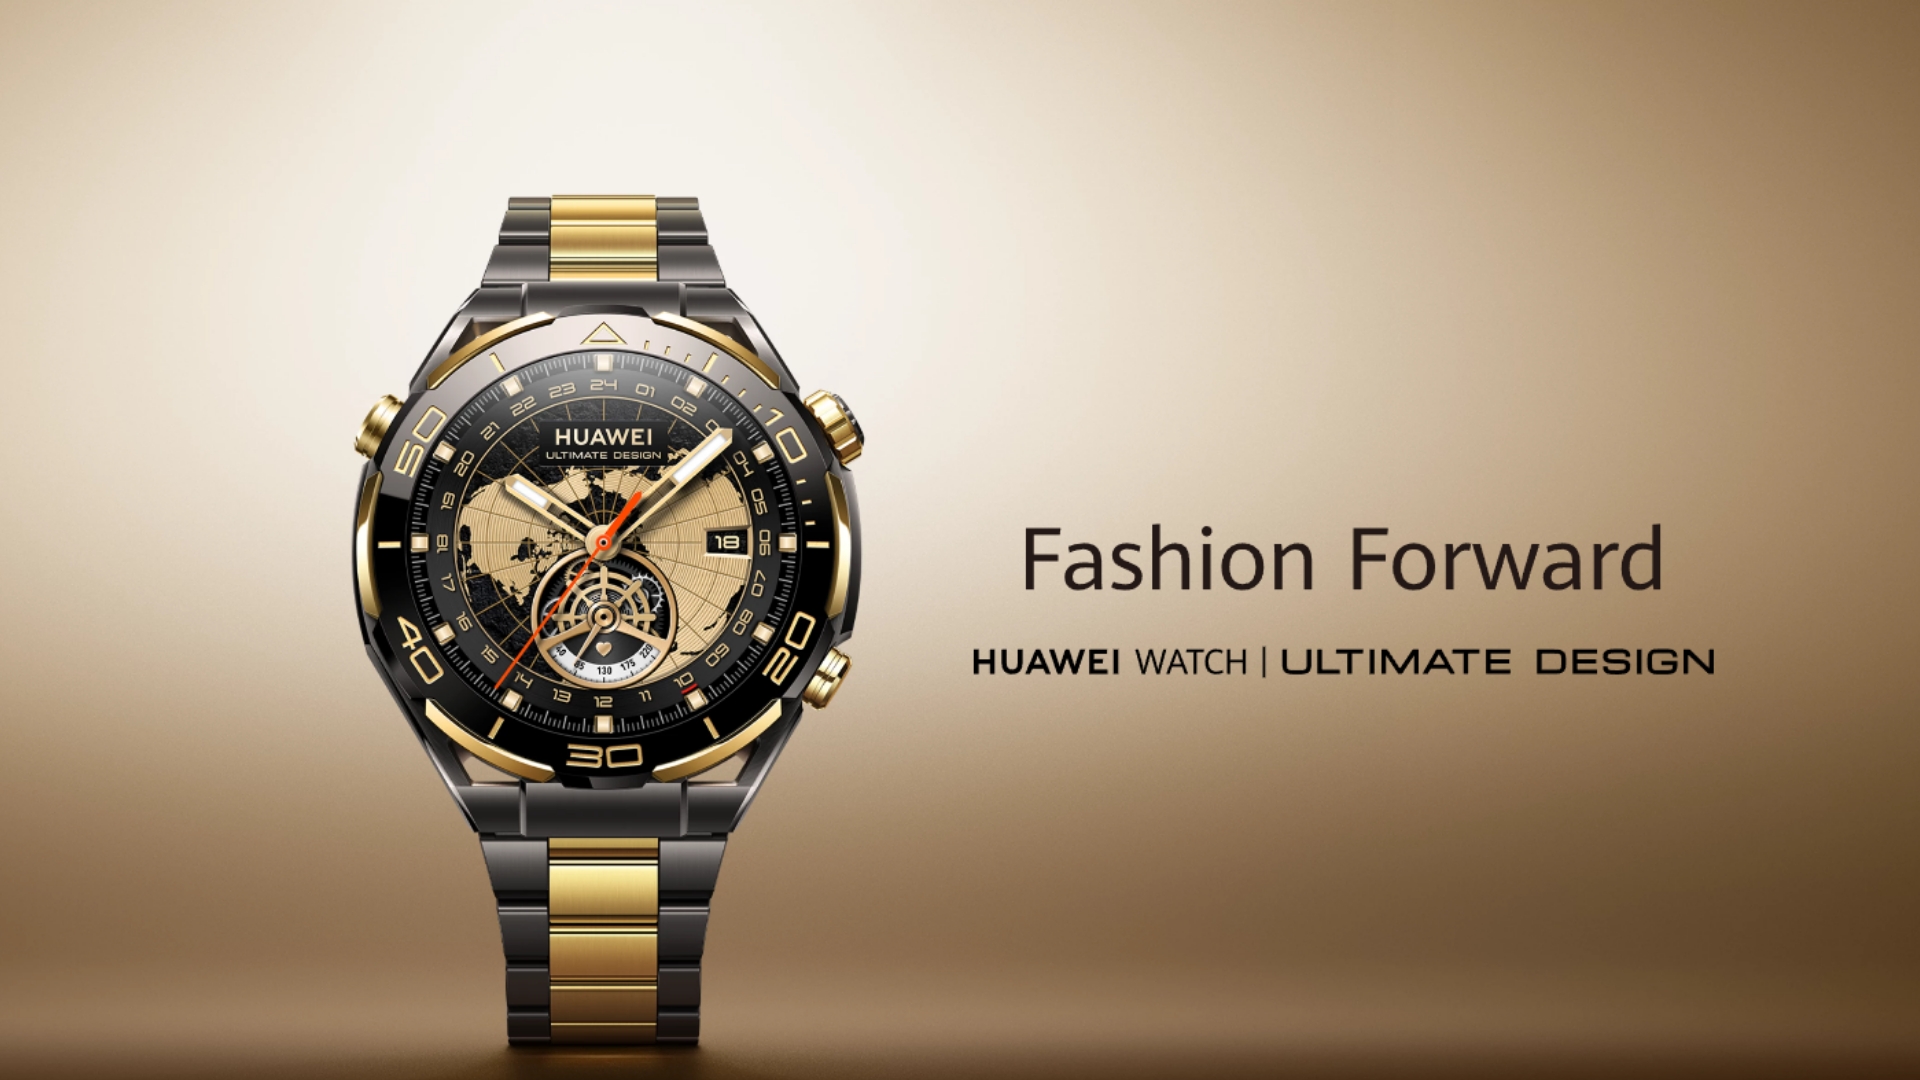 The 18K Gold Huawei Watch Ultimate has been released